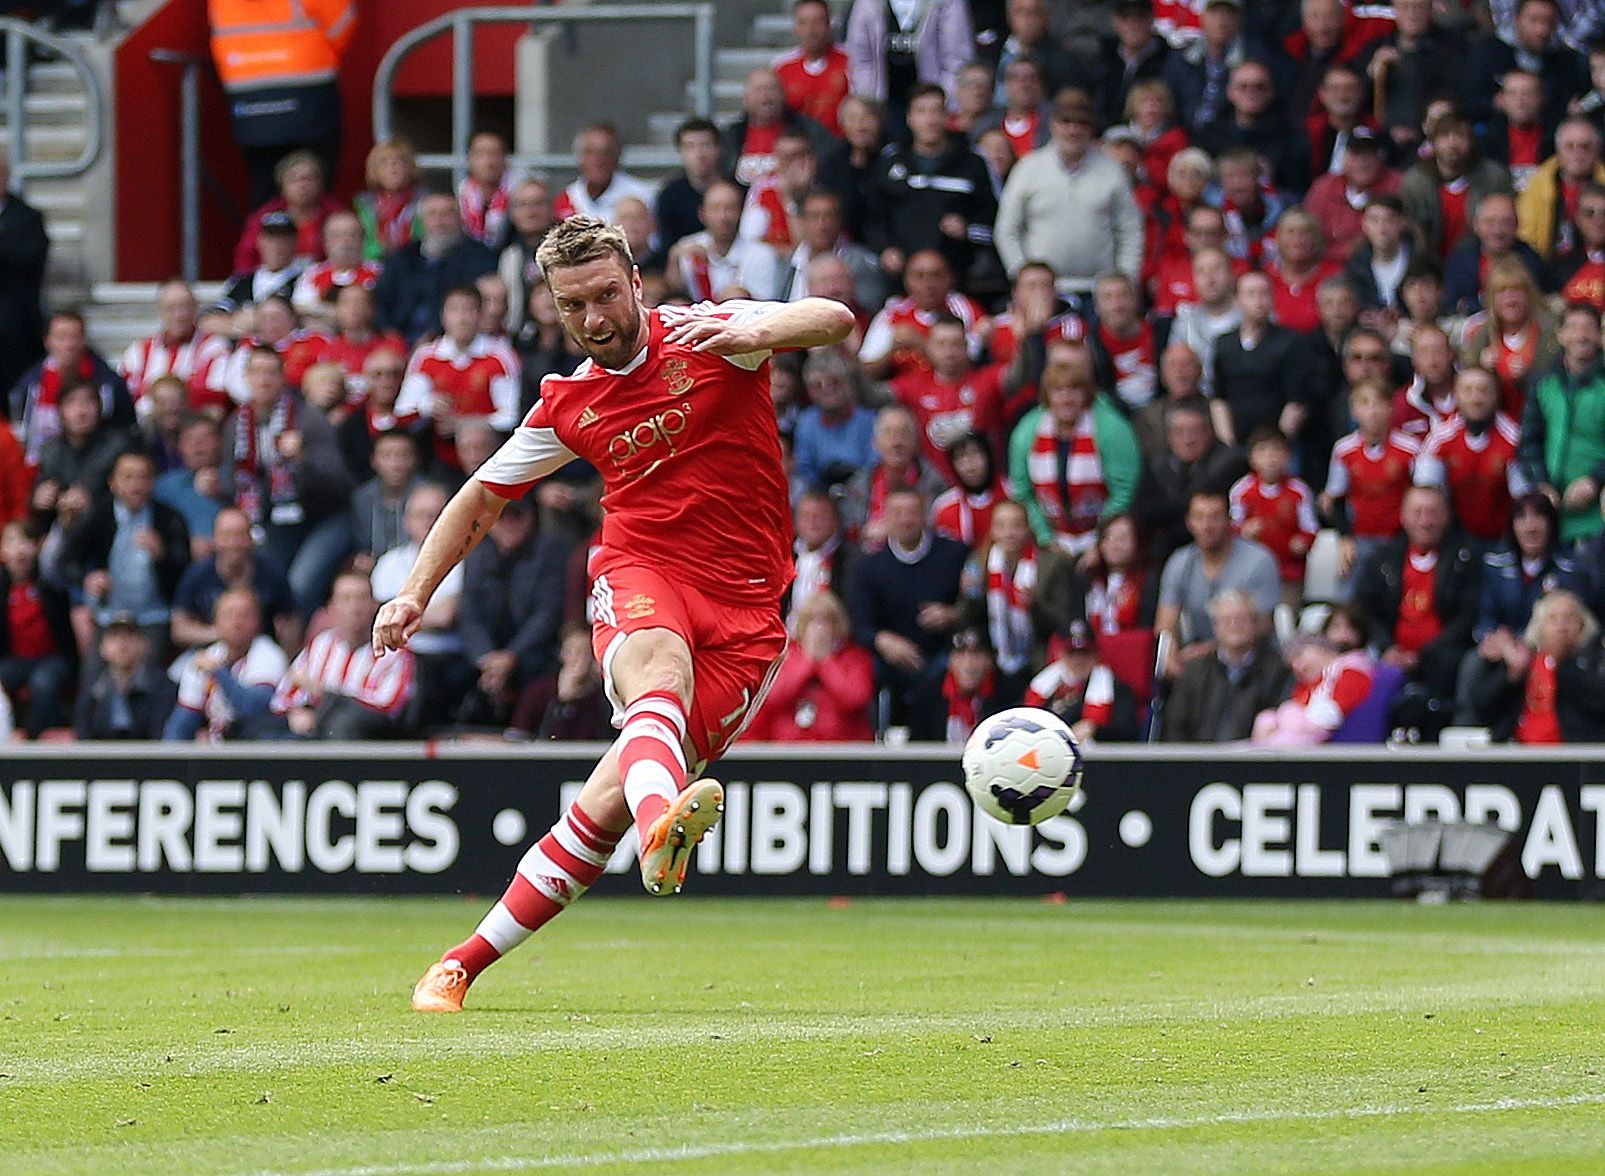 Football - Southampton v Manchester United - Barclays Premier League - St Mary's Stadium - 11/5/14 
Rickie Lambert scores the first goal for Southampton 
Mandatory Credit: Action Images / Matthew Childs 
Livepic 
EDITORIAL USE ONLY. No use with unauthorized audio, video, data, fixture lists, club/league logos or 